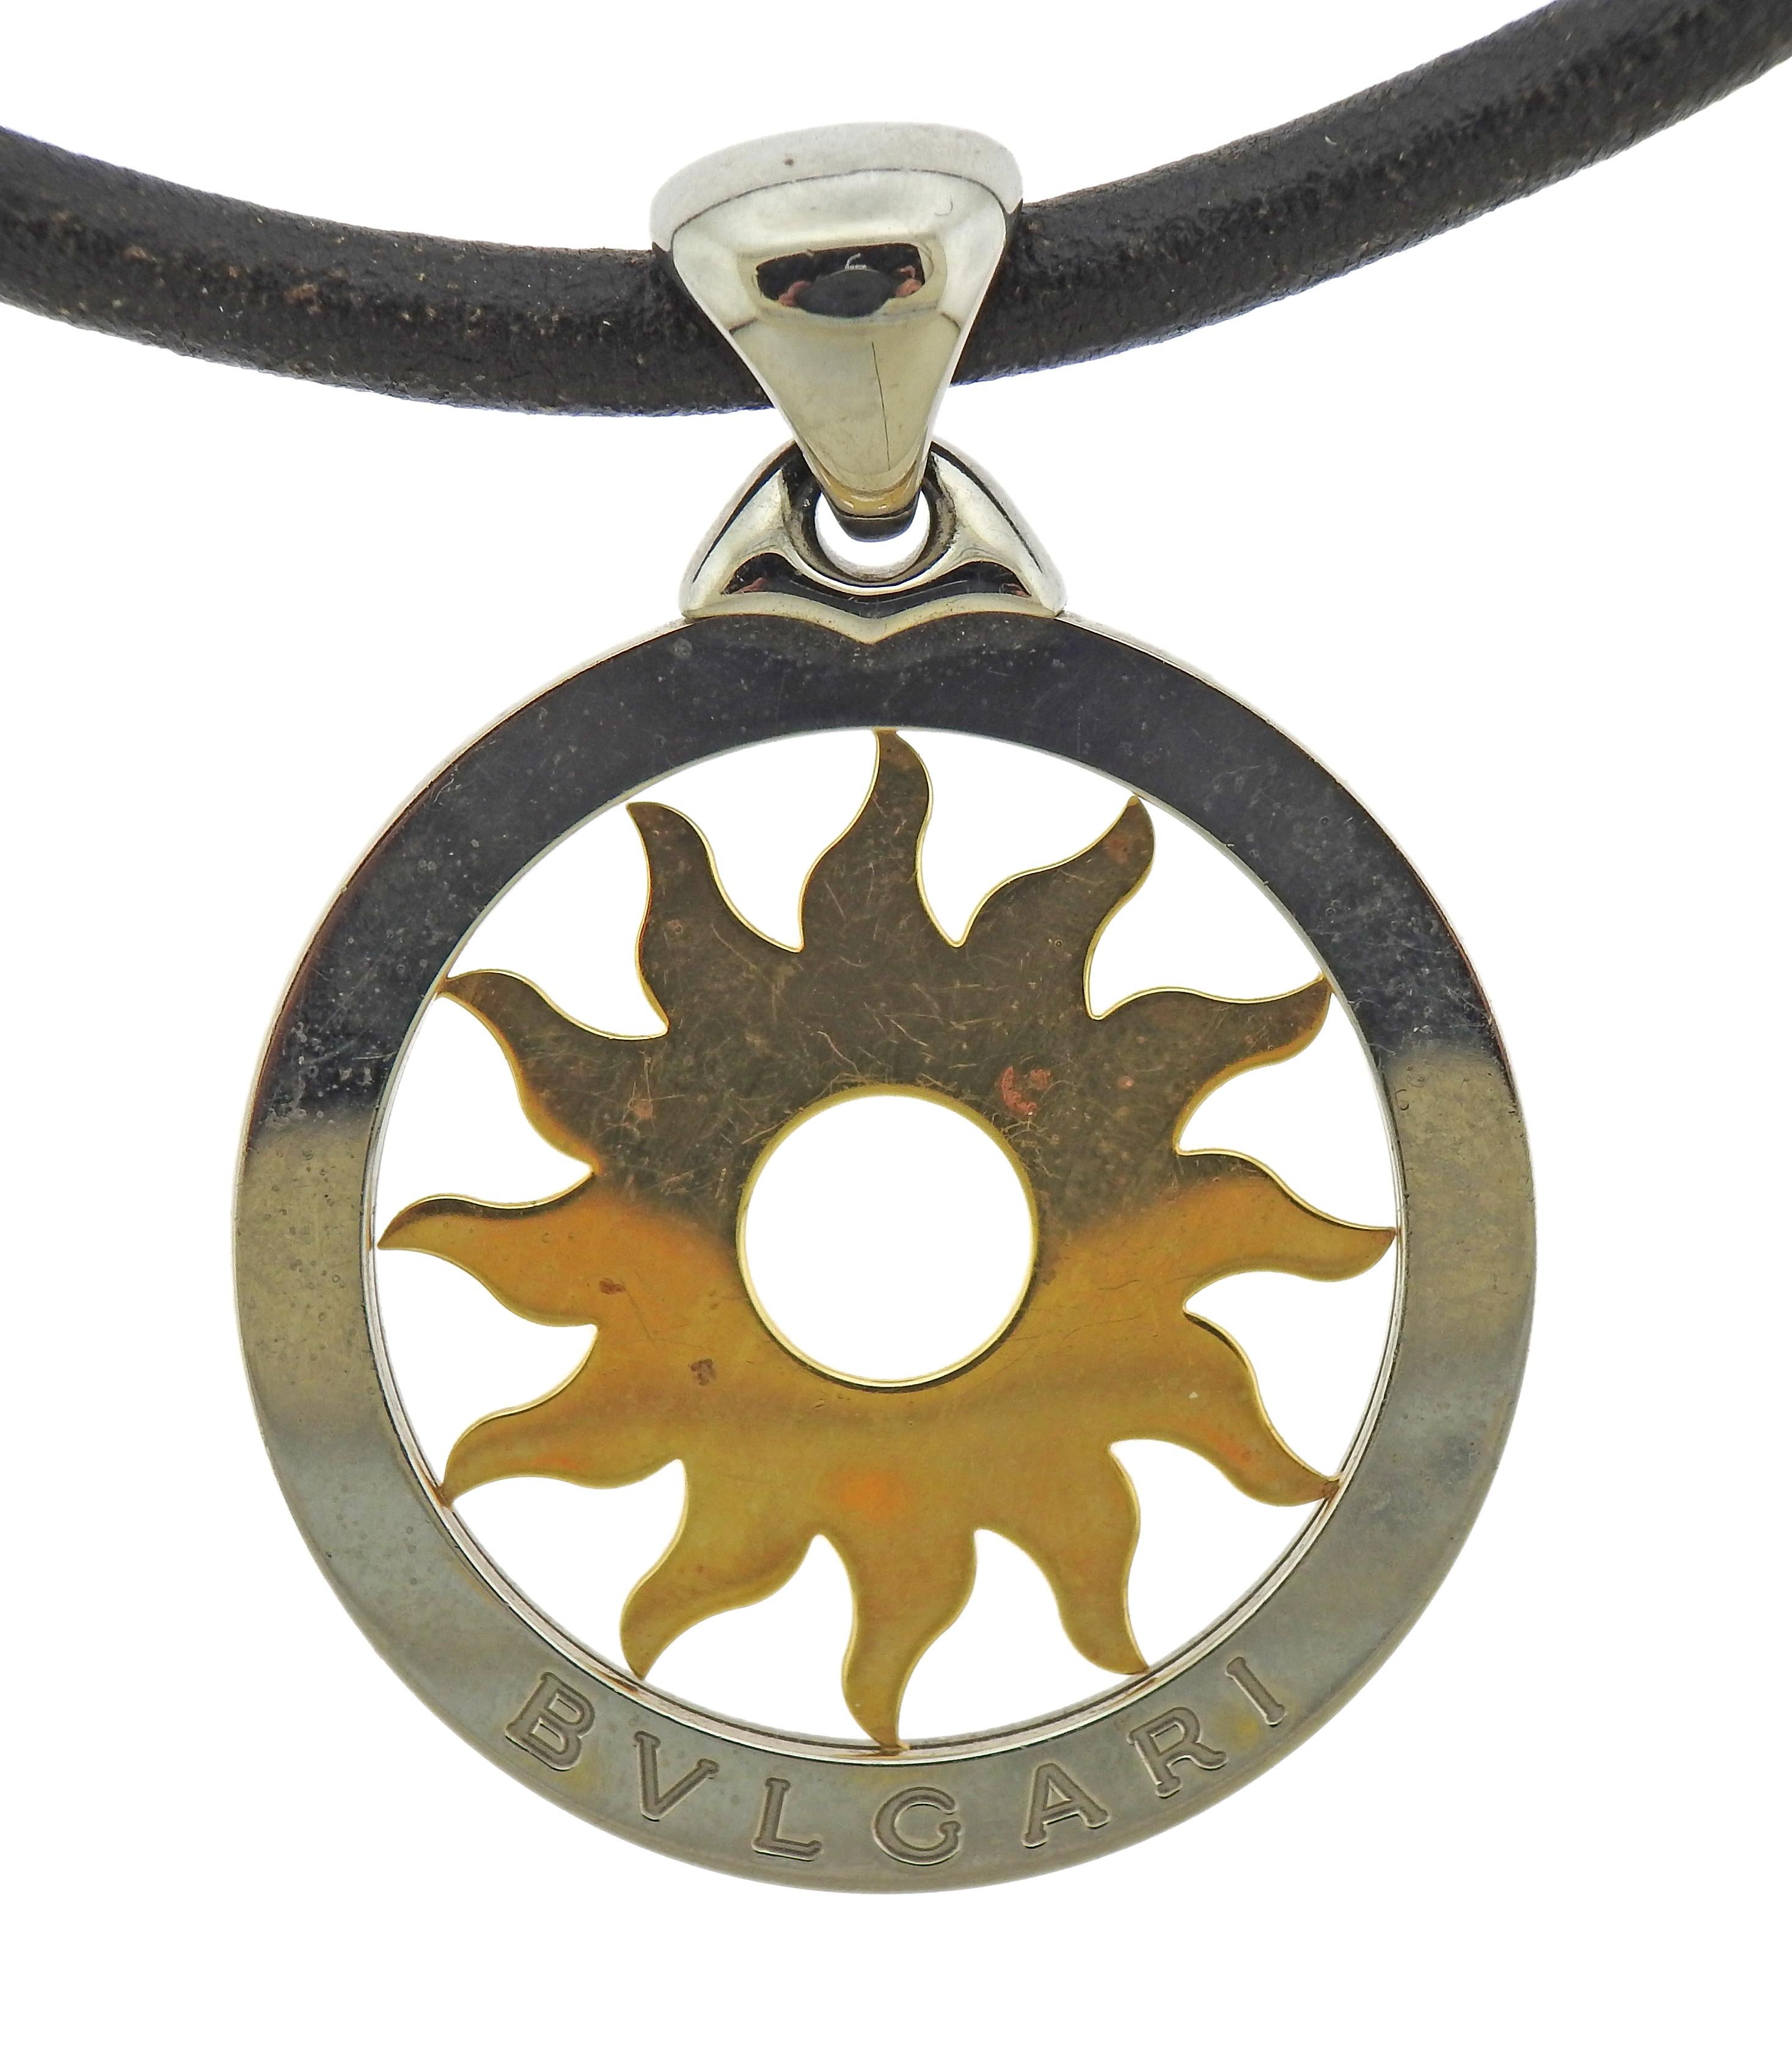 Bvlgari Tondo 18k gold and stainless steel sun pendant on an original leather cord necklace, with steel clasp. Necklace is 15.25